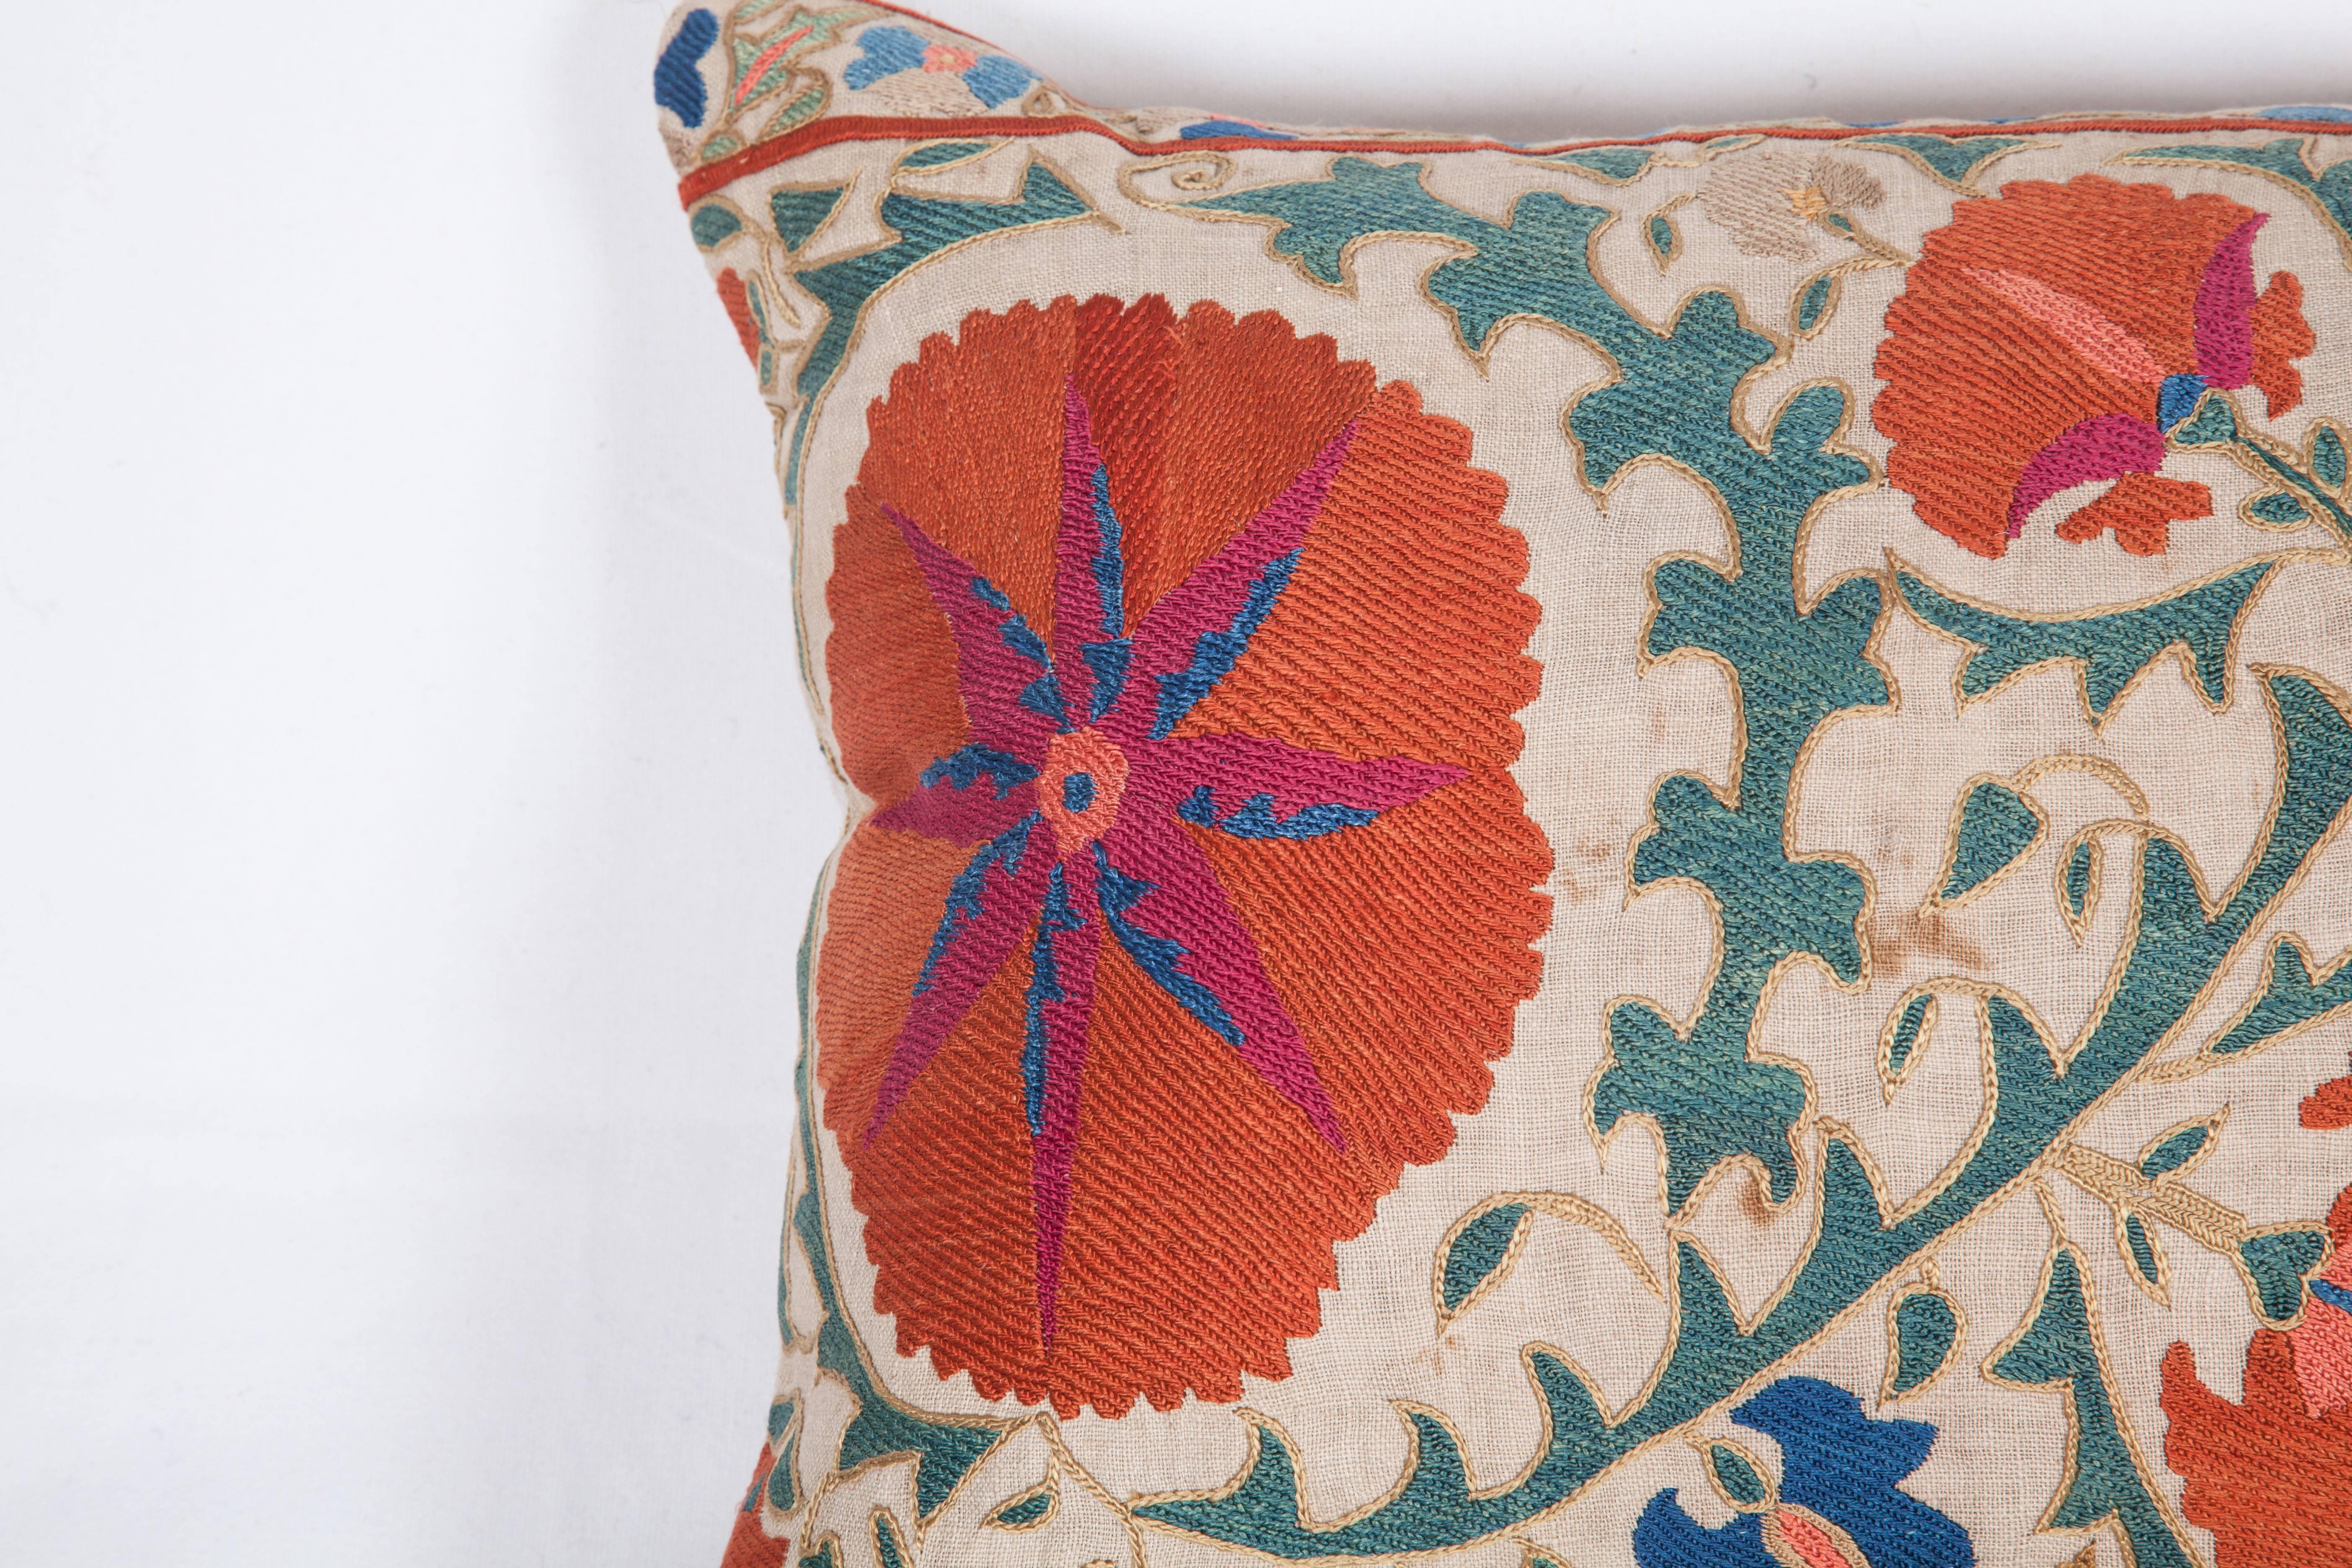 The pillow is made out of amid 19th century, Uzbek Bukhara Suzani. It does not come with an insert but it comes with a bag made to the size and out of cotton to accommodate the filling. The backing is made of linen. Please note 'filling is not